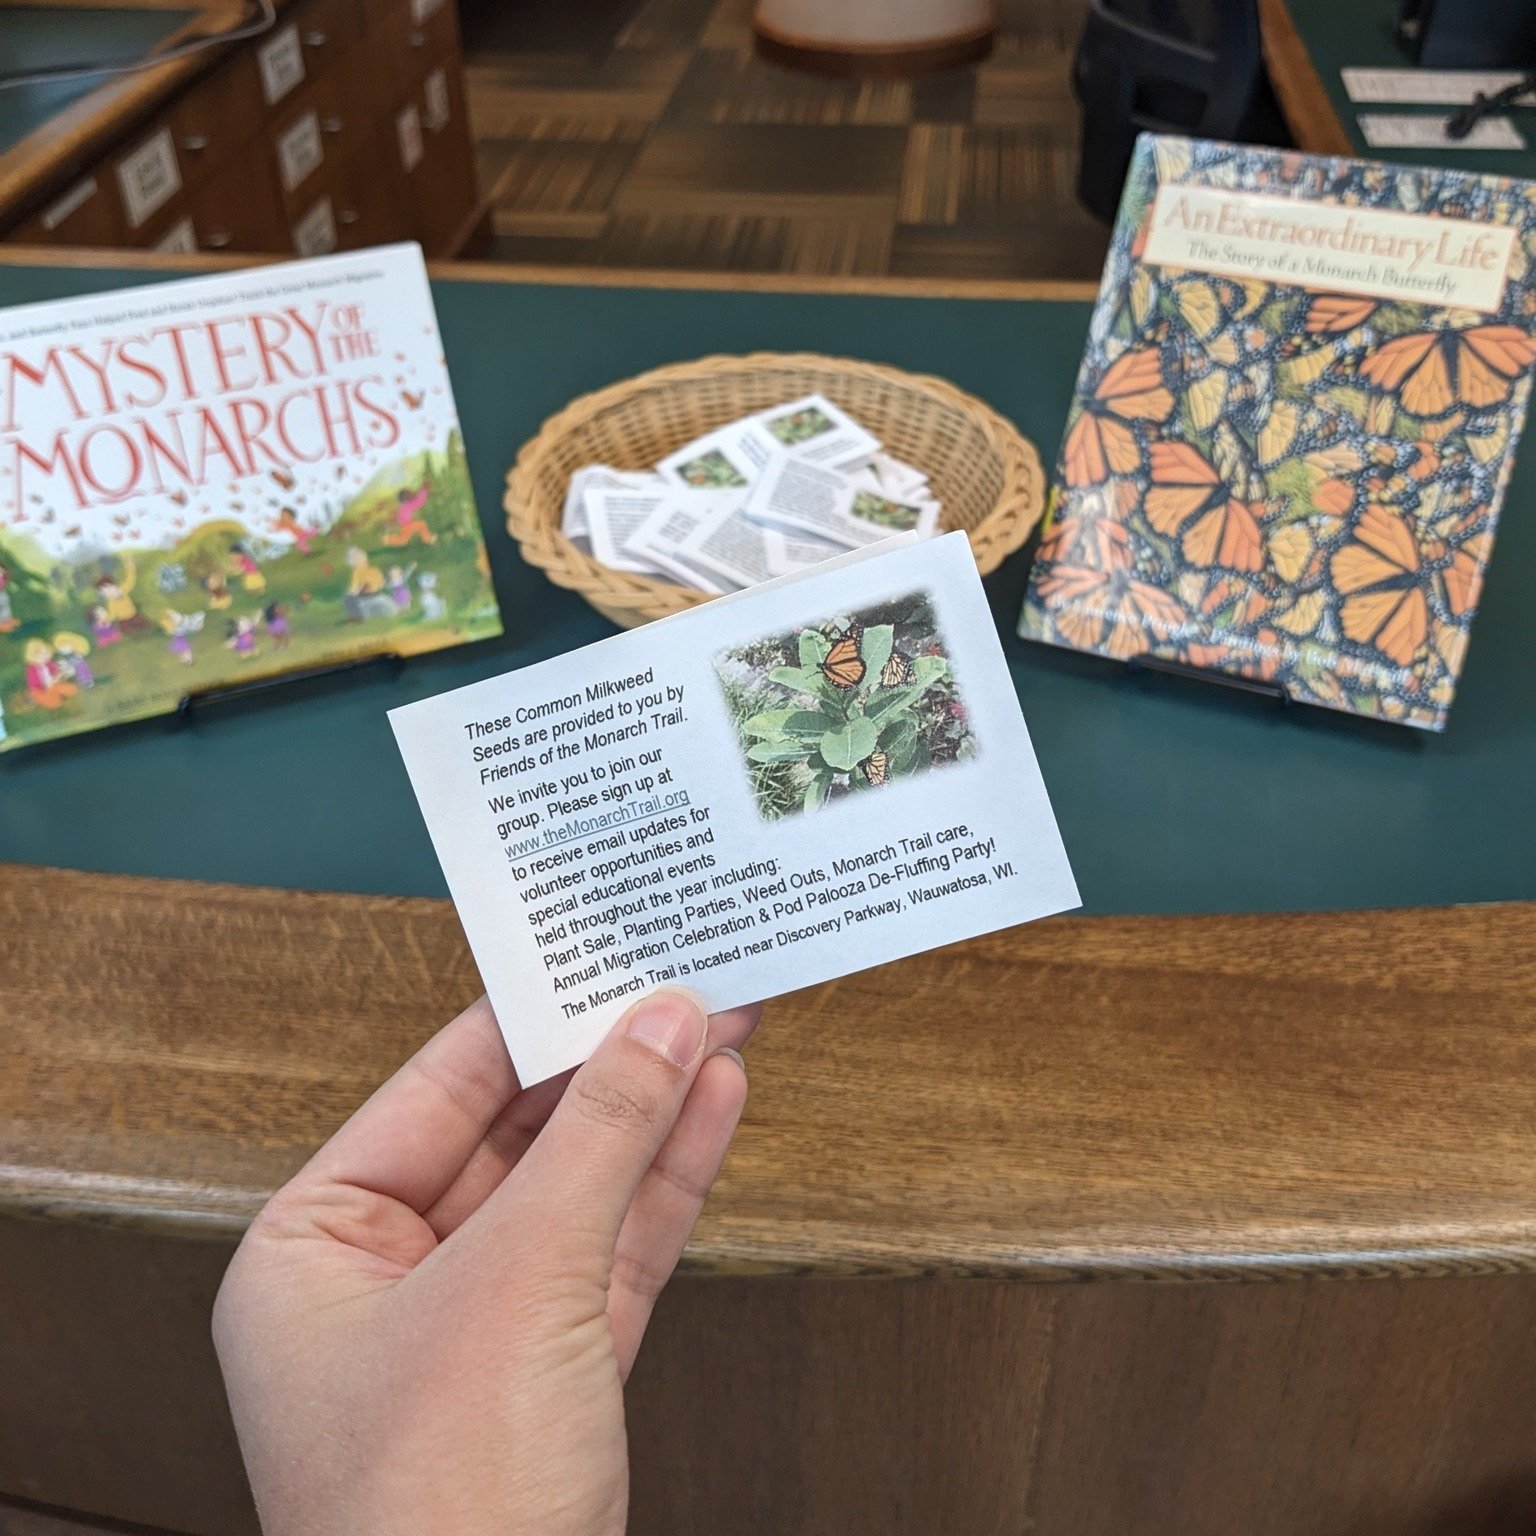 Calling all gardeners 🌷🪻

Packages of common milkweed seeds are free for the taking at the Circulation Counter near our New Adult Books! According to the US Forset Service, milkweed is a vital food source for over 450 spieces of insects, including 